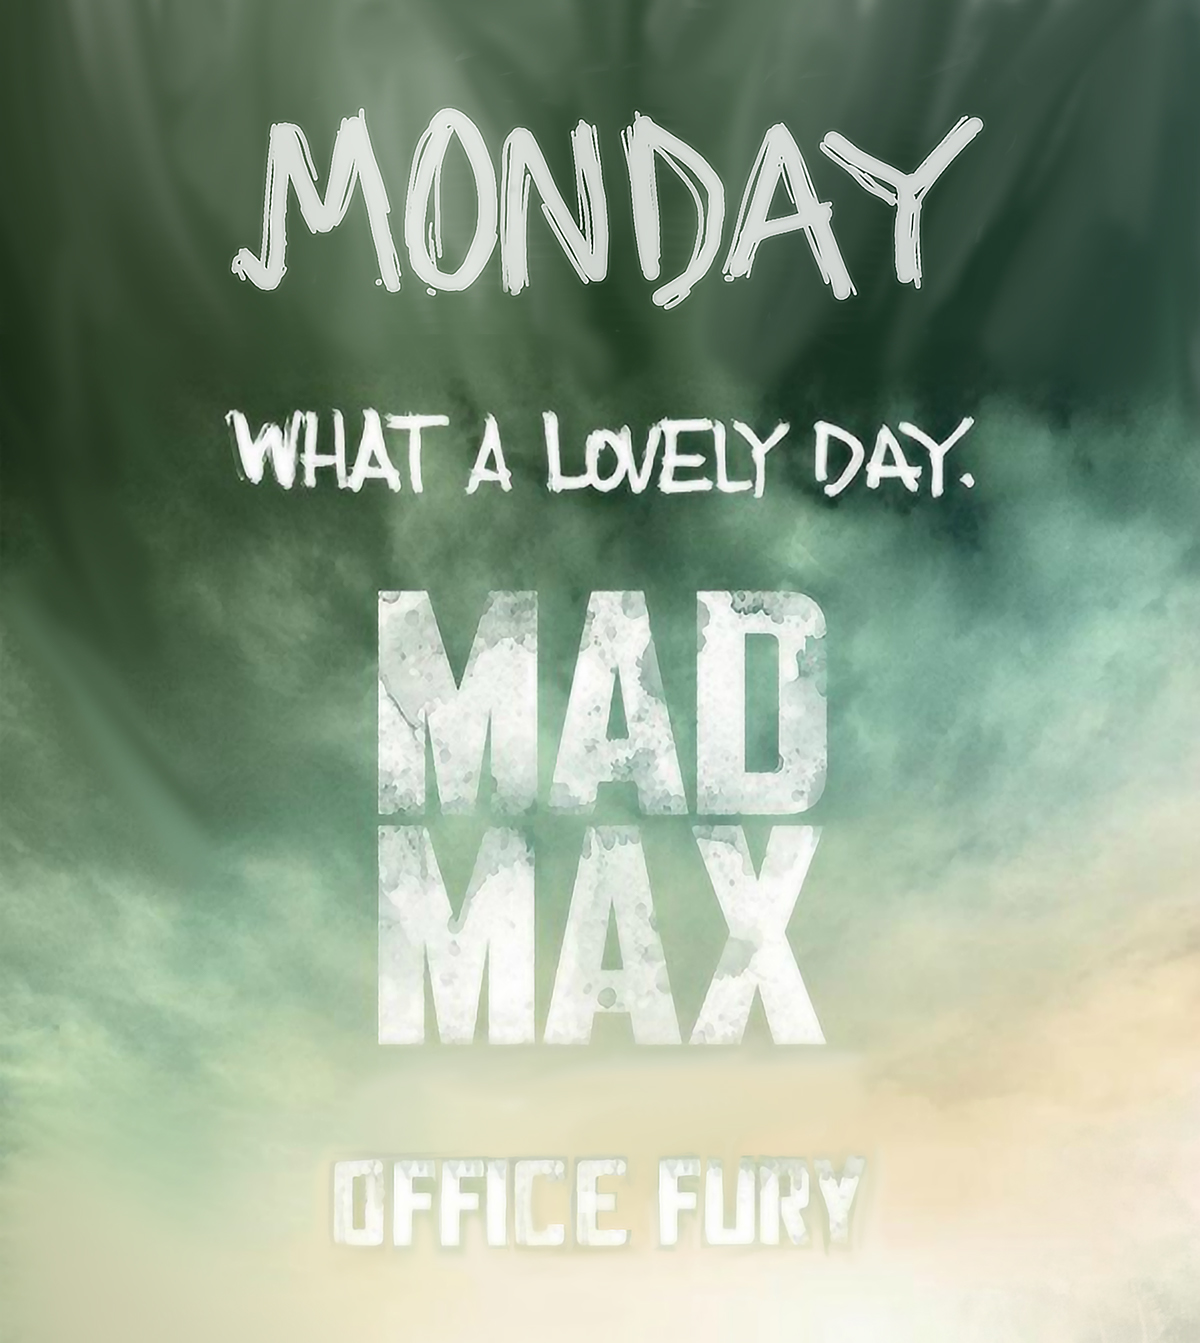 Mad Max Fury road Mad Max concept art funny Office funny office art bram leegwater at the office Funny illustrations wacom illustrations served